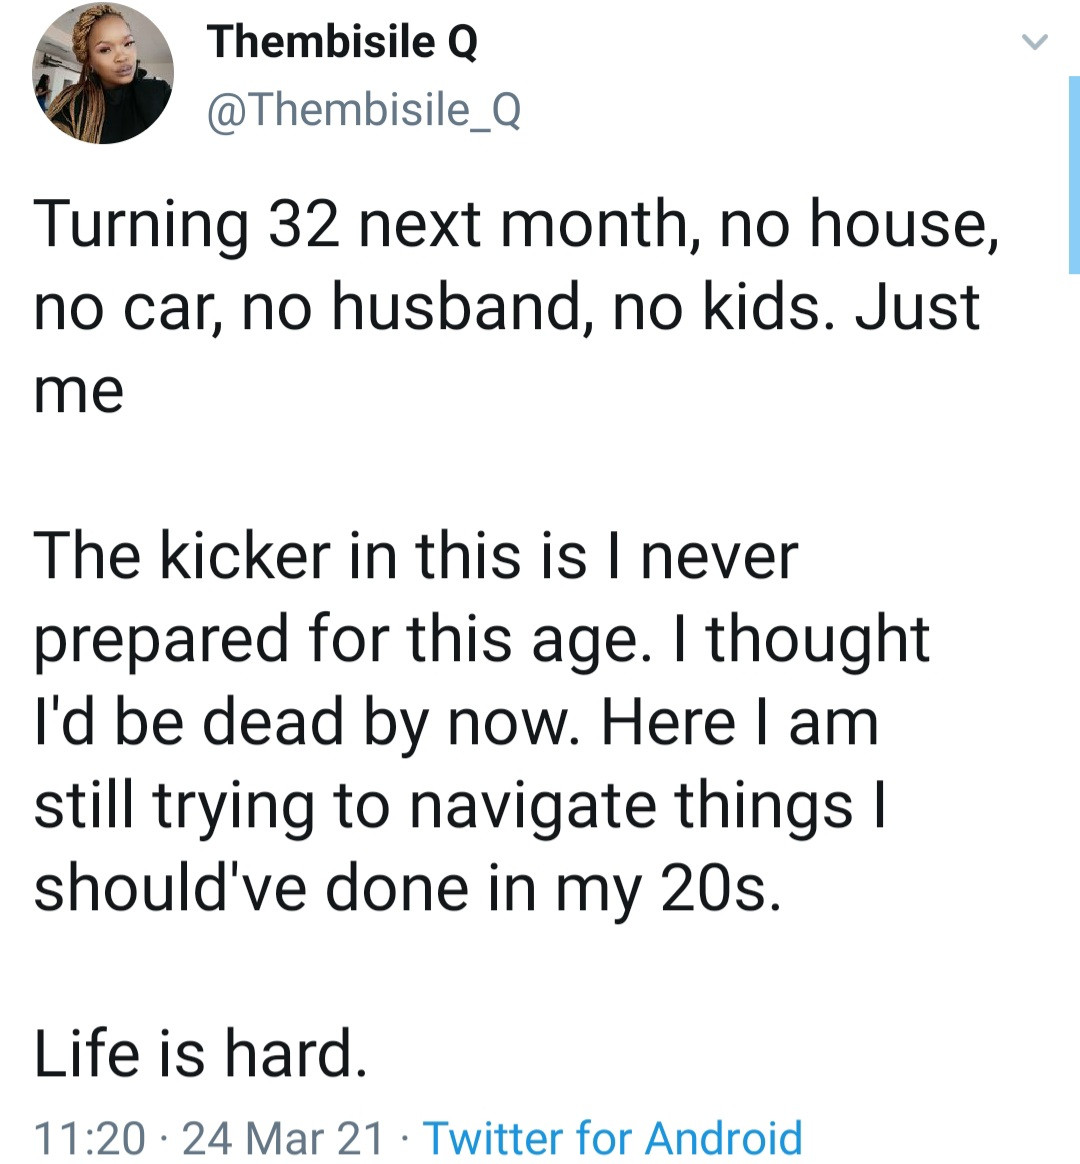 Twitter users reveal how hard life has been for them